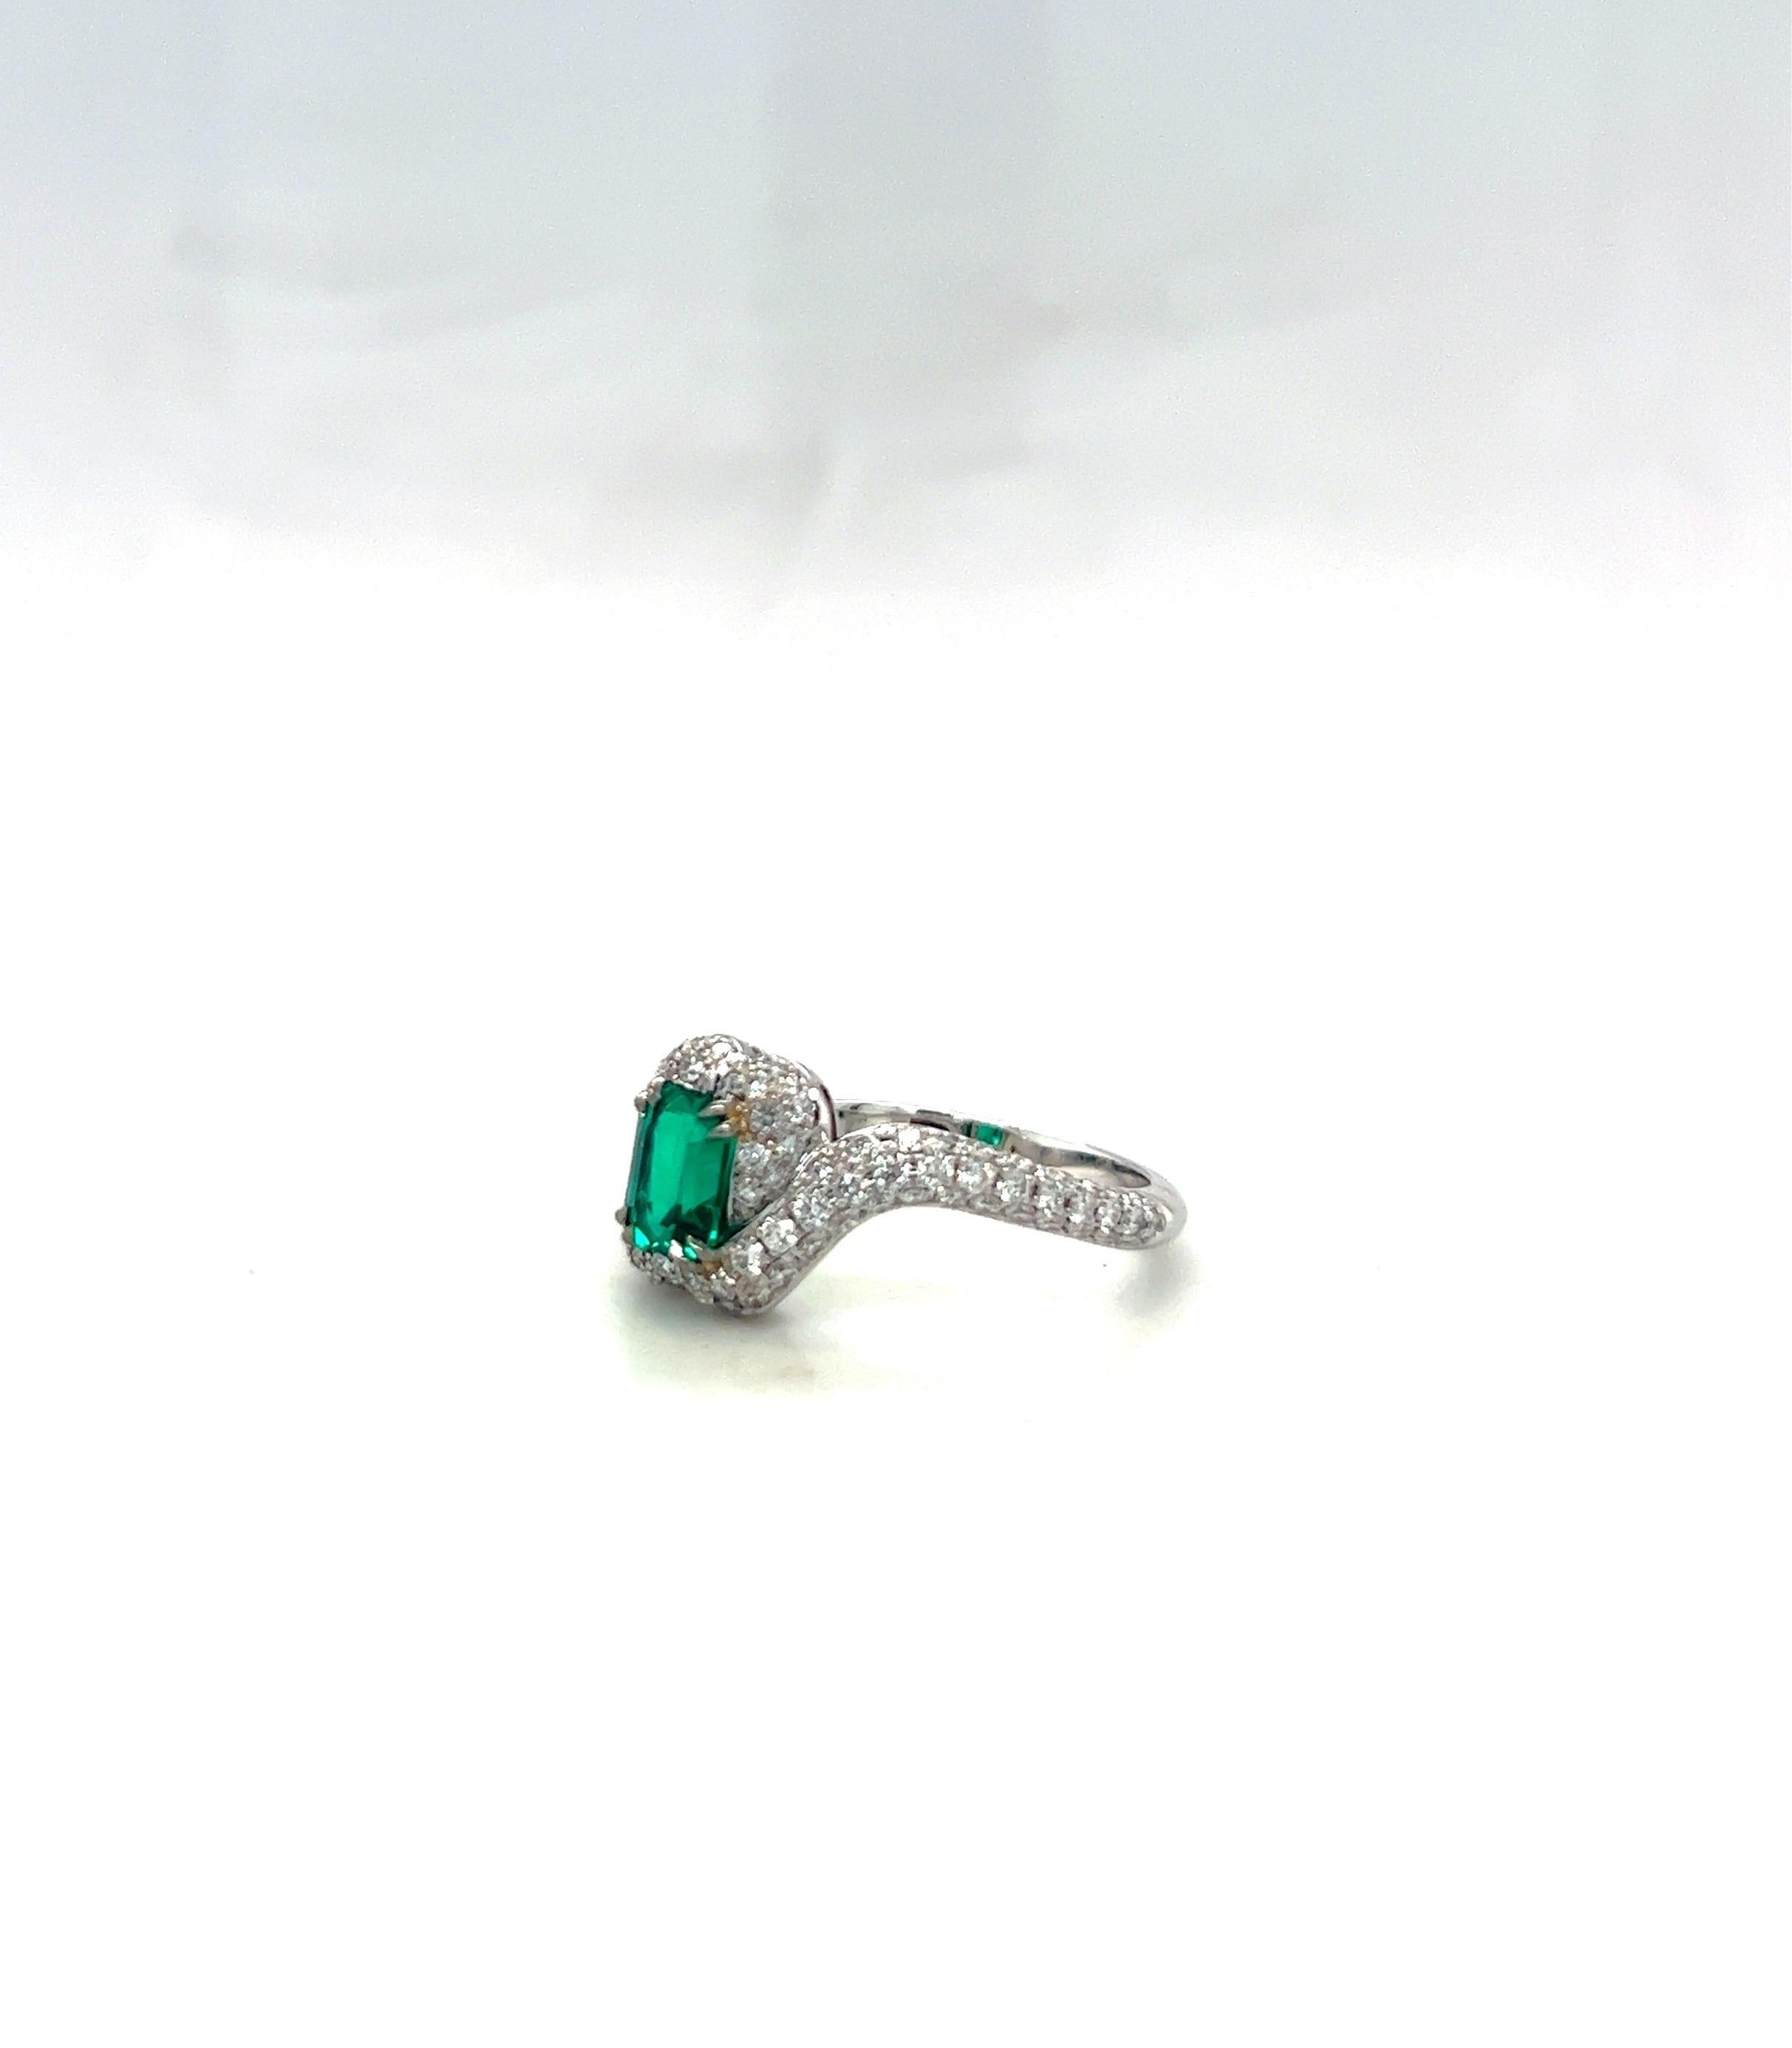 Women's or Men's 18 Karat White Gold 1.01 Ct Colombian Emerald and 1.01 Ct. Diamond Ring For Sale